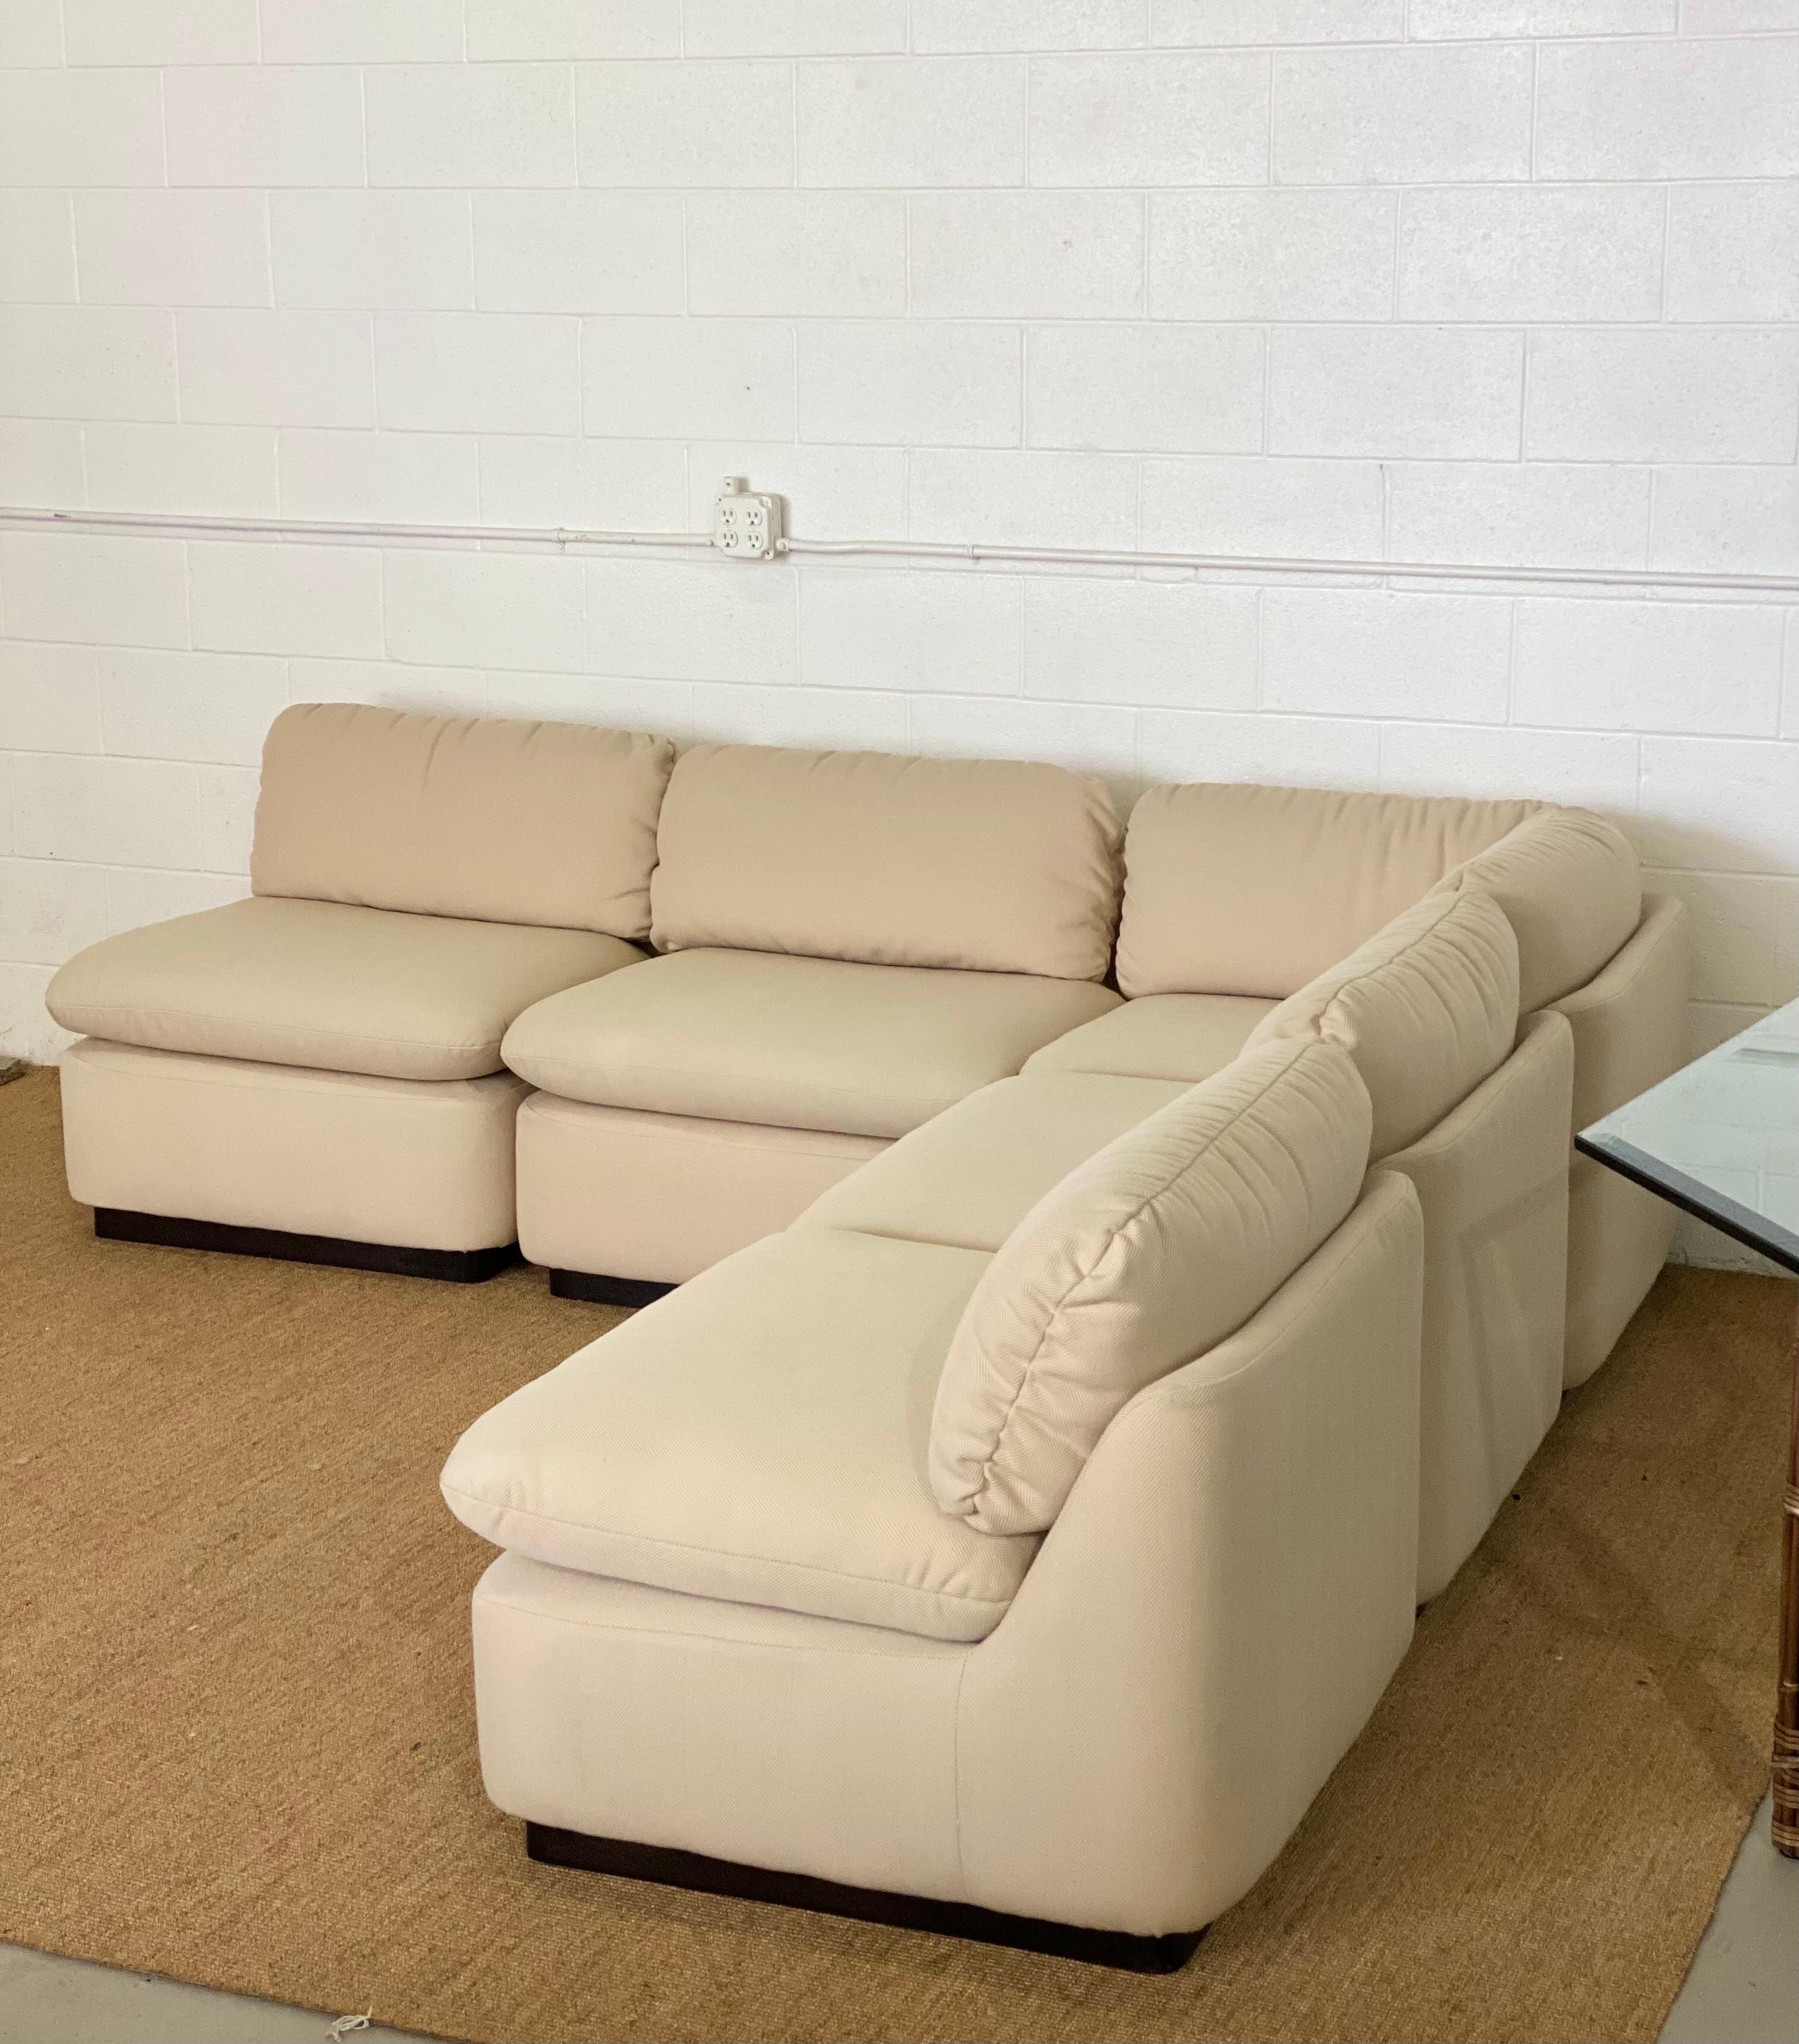 Moderne 1990 Directional White Ivory Five Piece Modular Lounge Sectional - 5 Pieces en vente